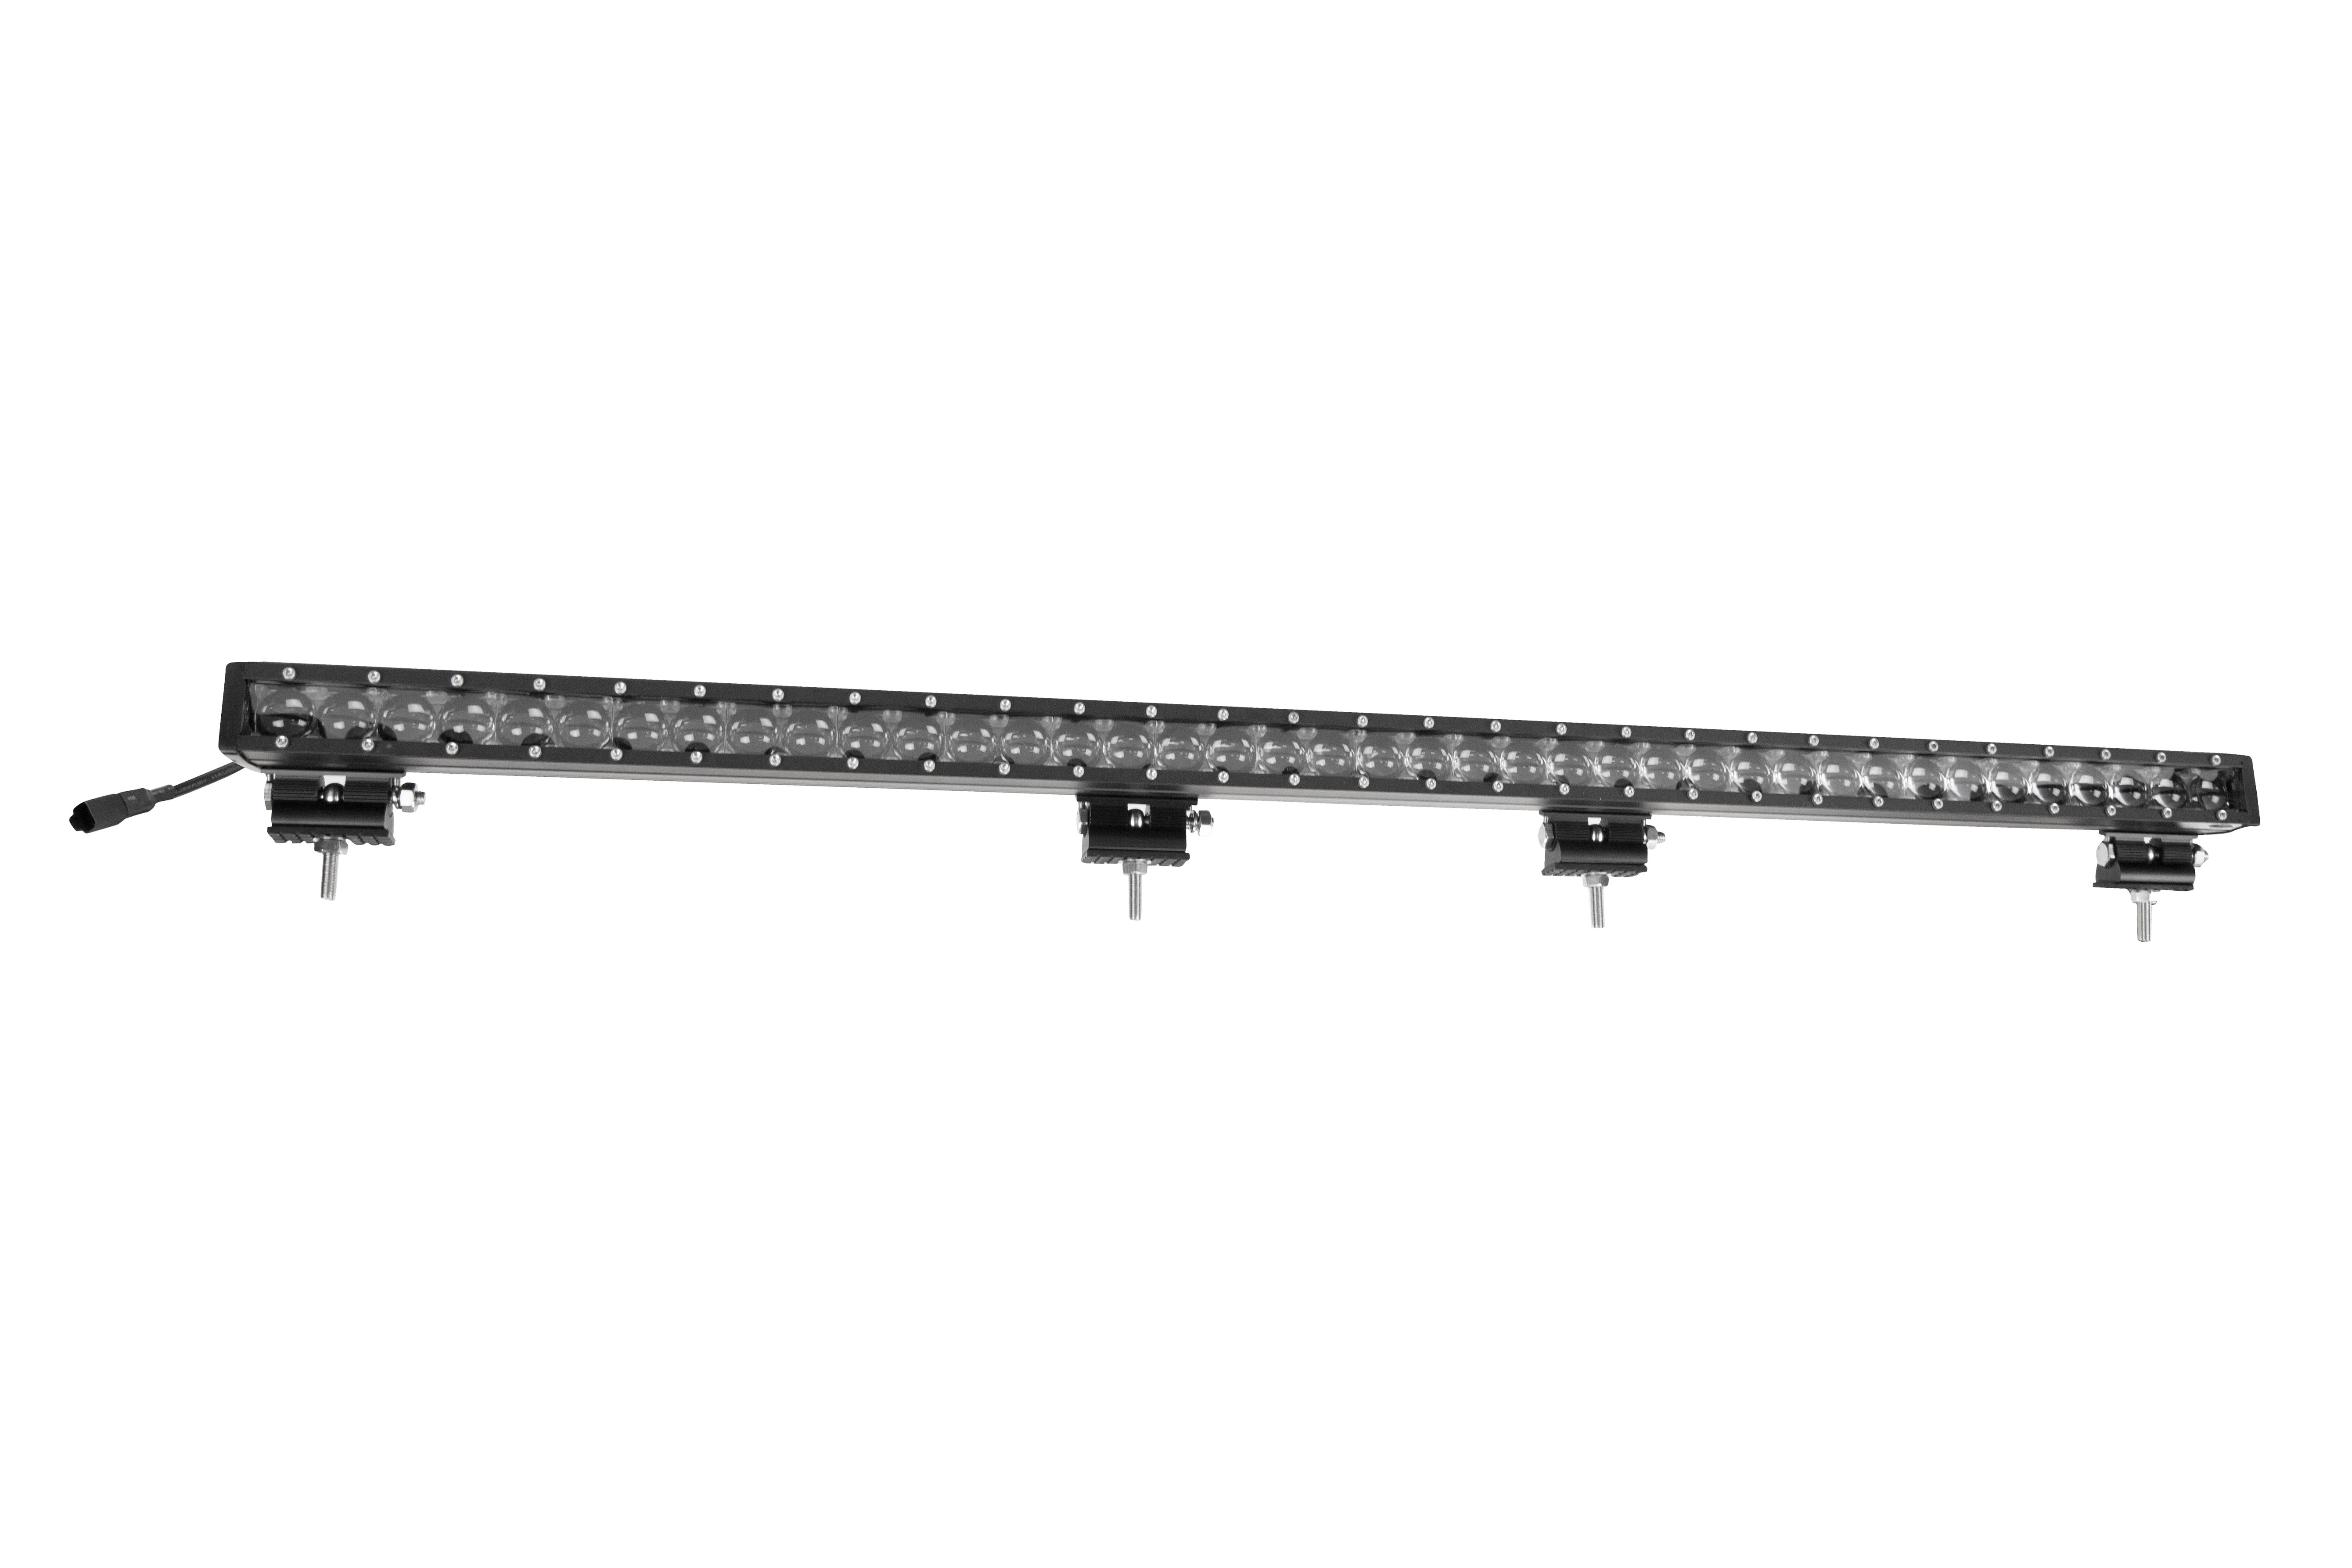 200 Watt LED Light Bar Constructed with 40 CREE LEDS